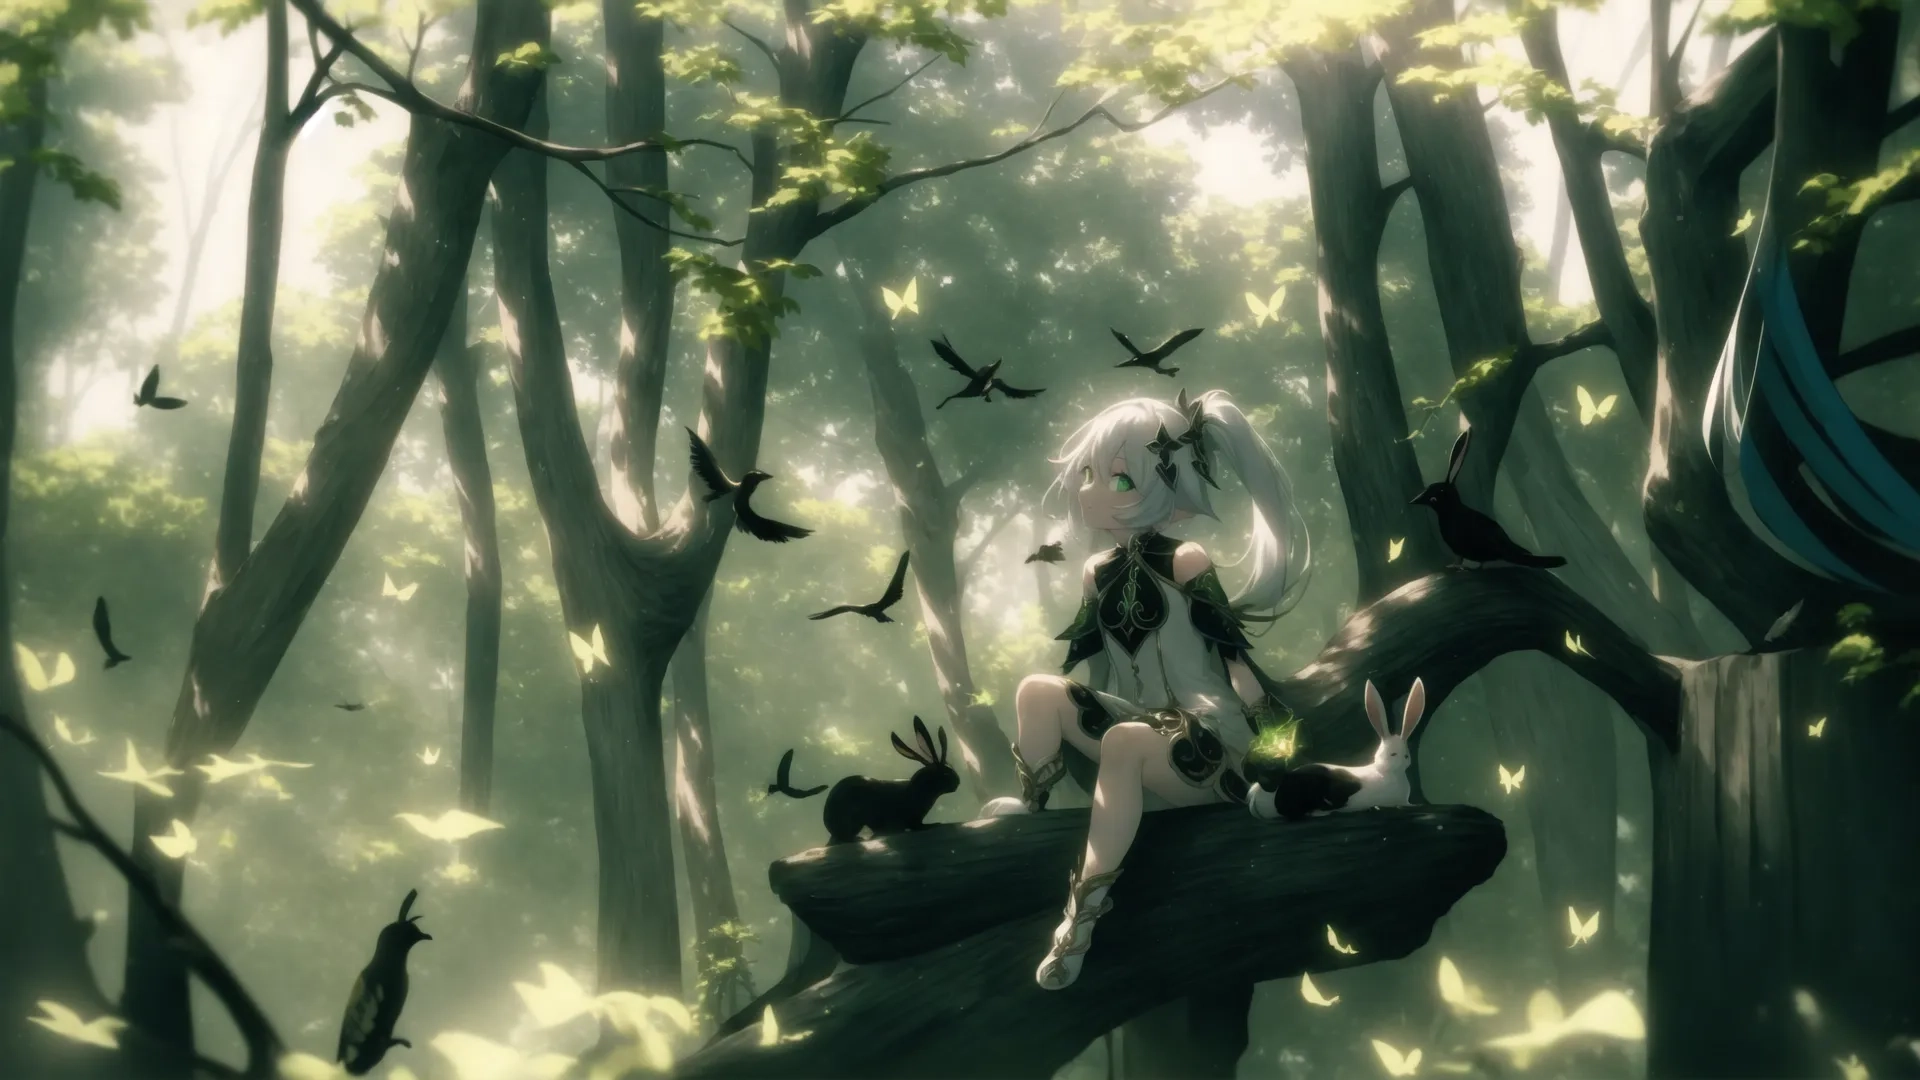 an anime girl sitting on a fallen tree branch with flying birds behind her and some black crows around her in the foreground and trees at the background
